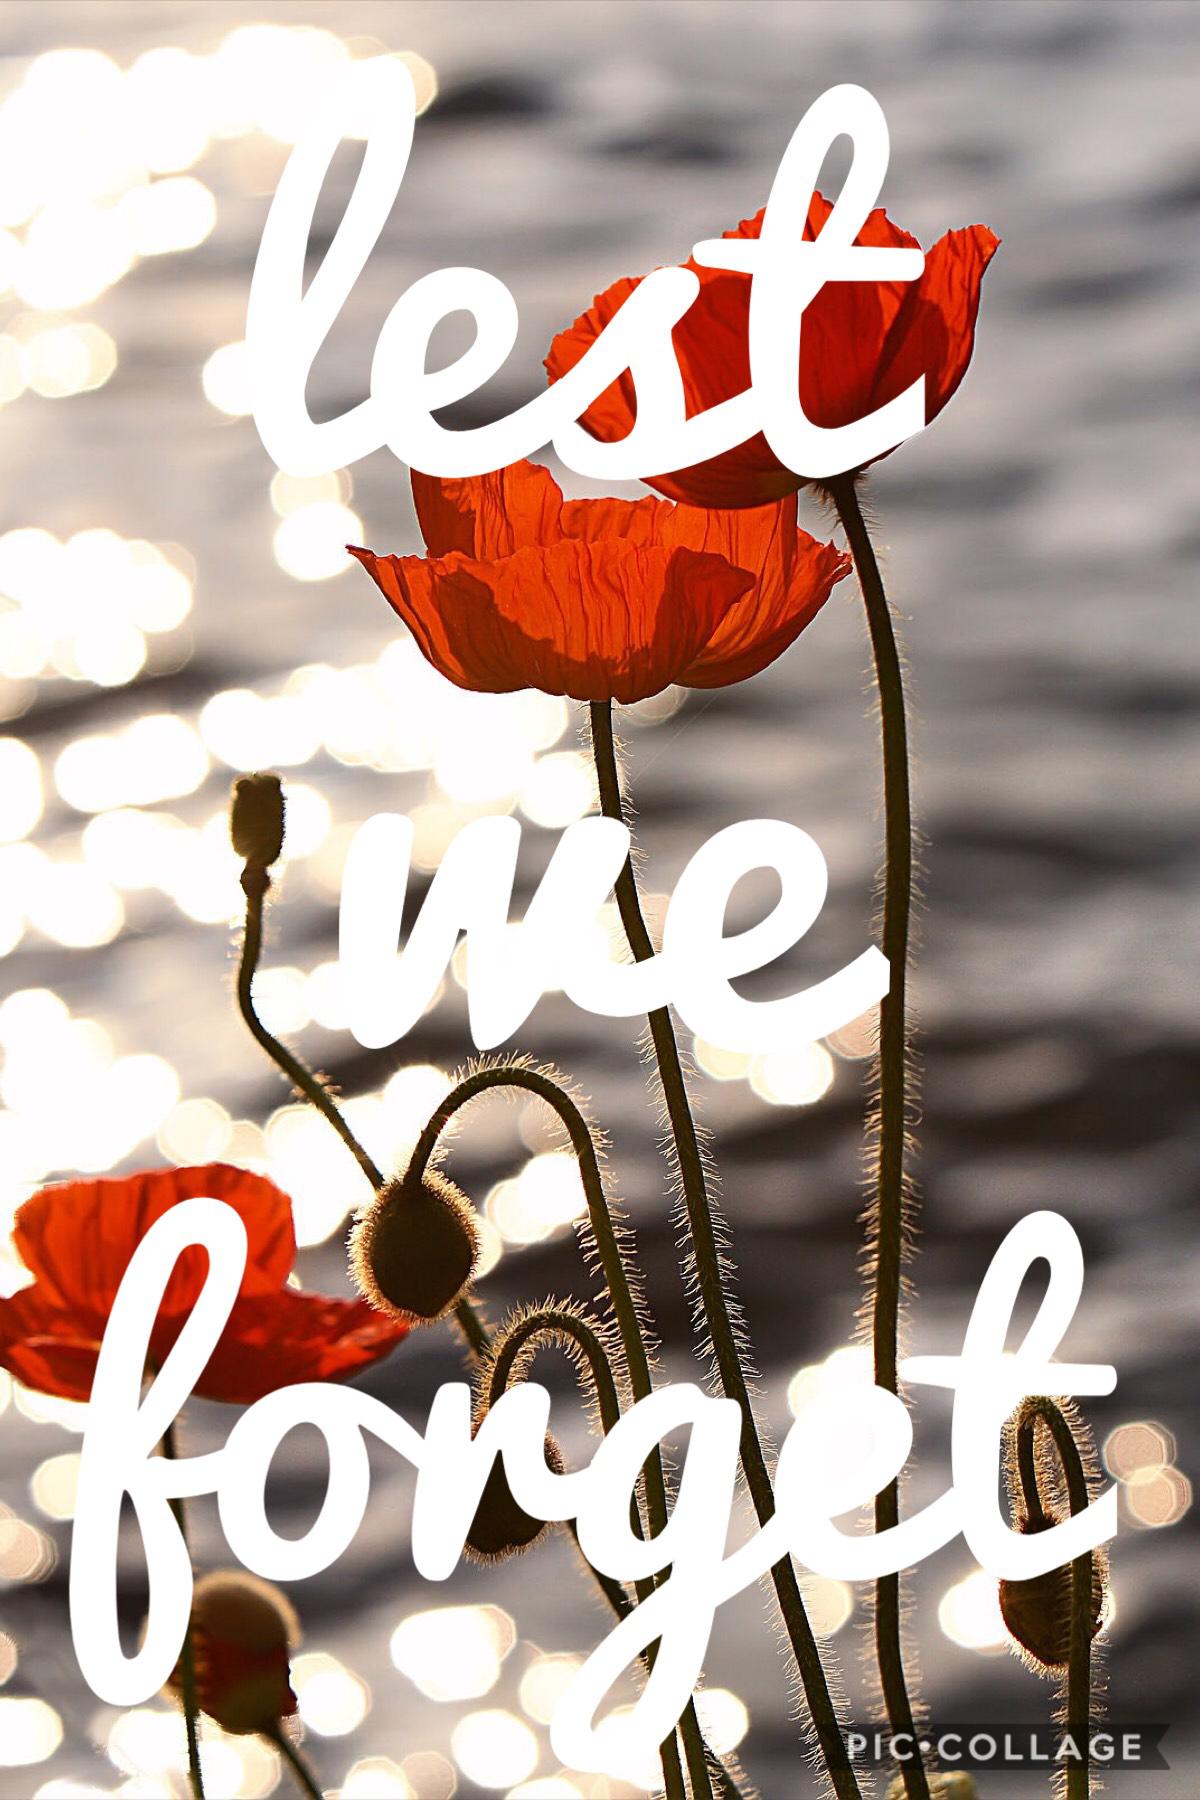 hey everyone! Today is Anzac Day for Australia & New Zealand. I’m in the US so I did some research and Anzac Day is a rememberance day for fallen soldiers. (It’s similar to our Memorial Day, fellow Yanks) love all of you, no matter where you are or where 